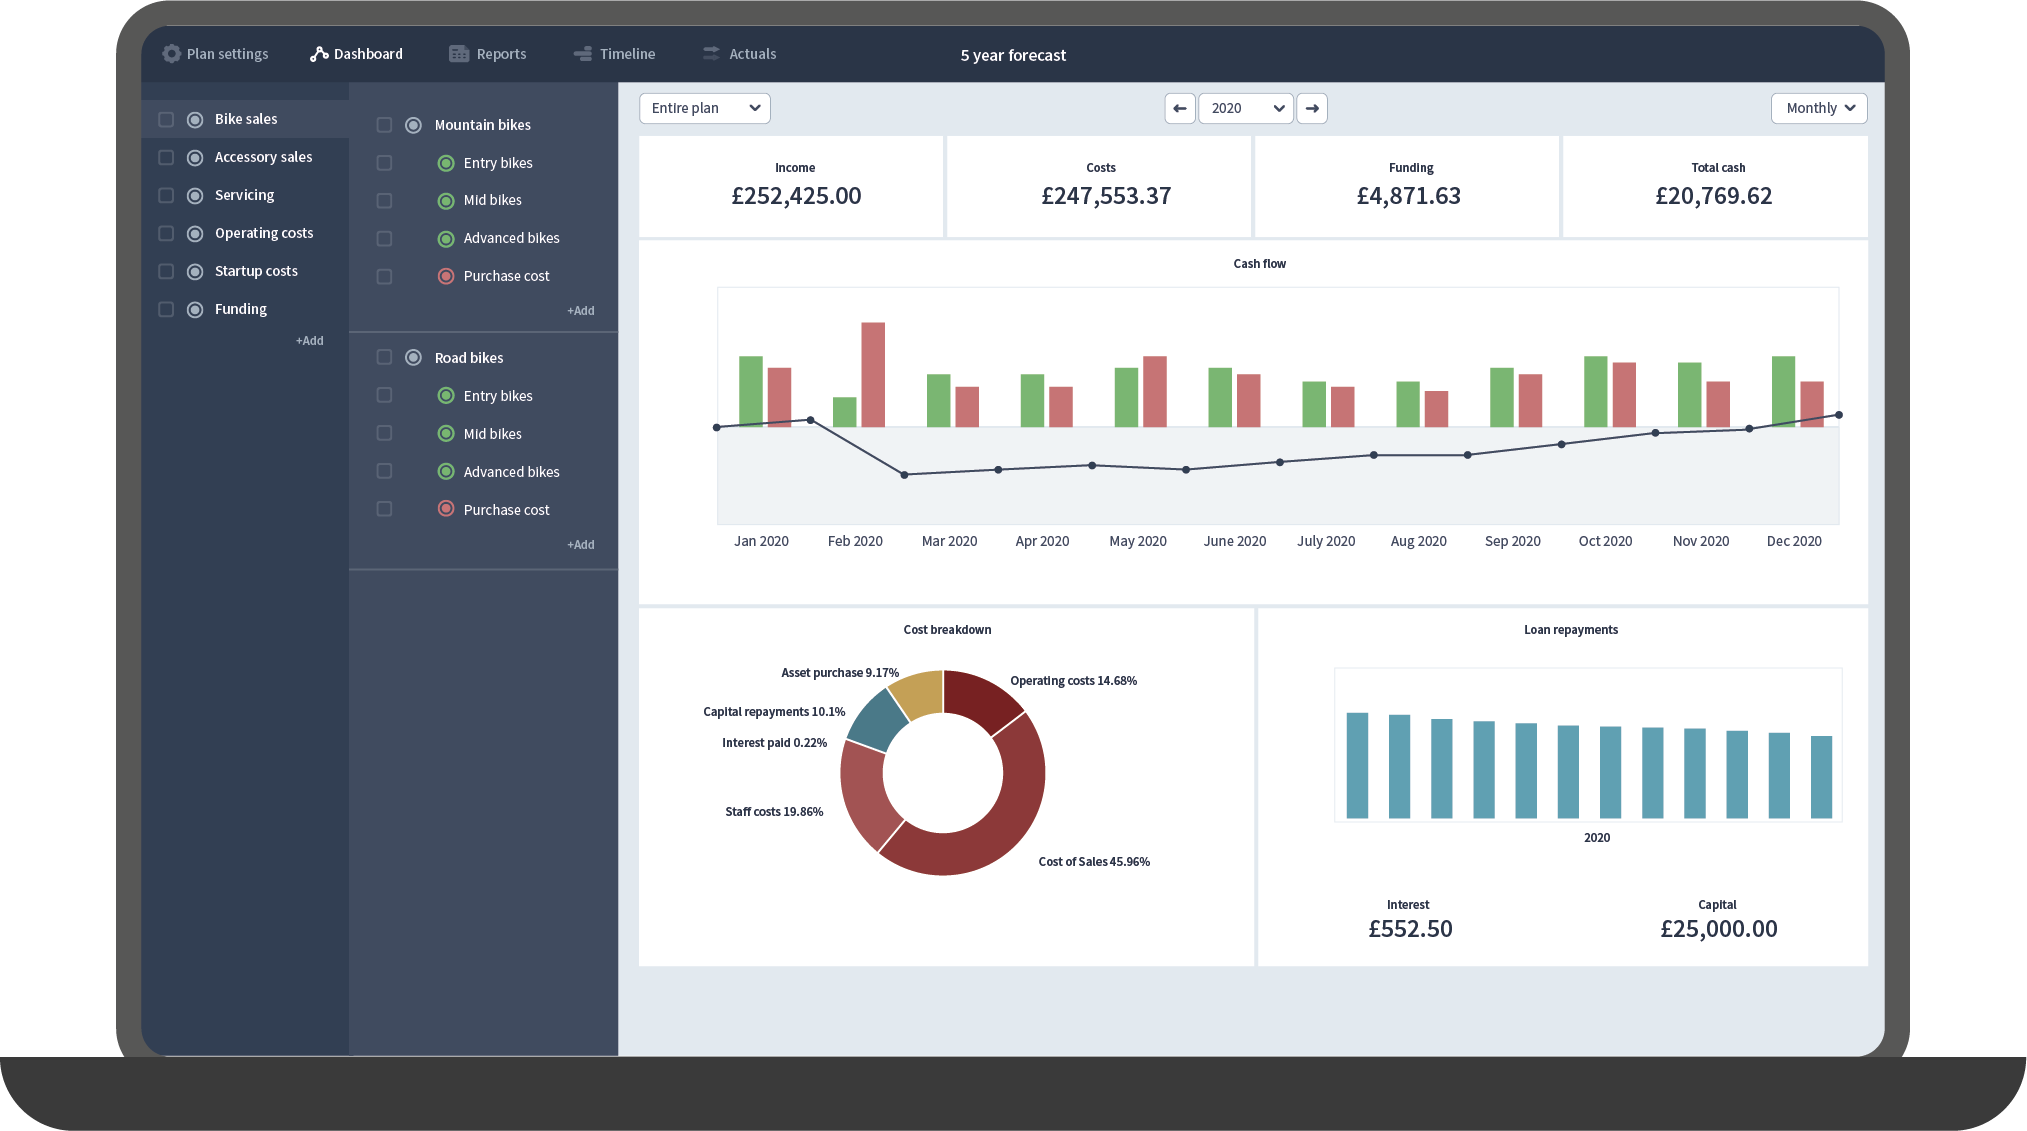 Brixx financial modelling and forecasting software. The whole balance sheet. Image for The Balance Sheet Layout Explained in a Super Simple Example post by Brixx Software